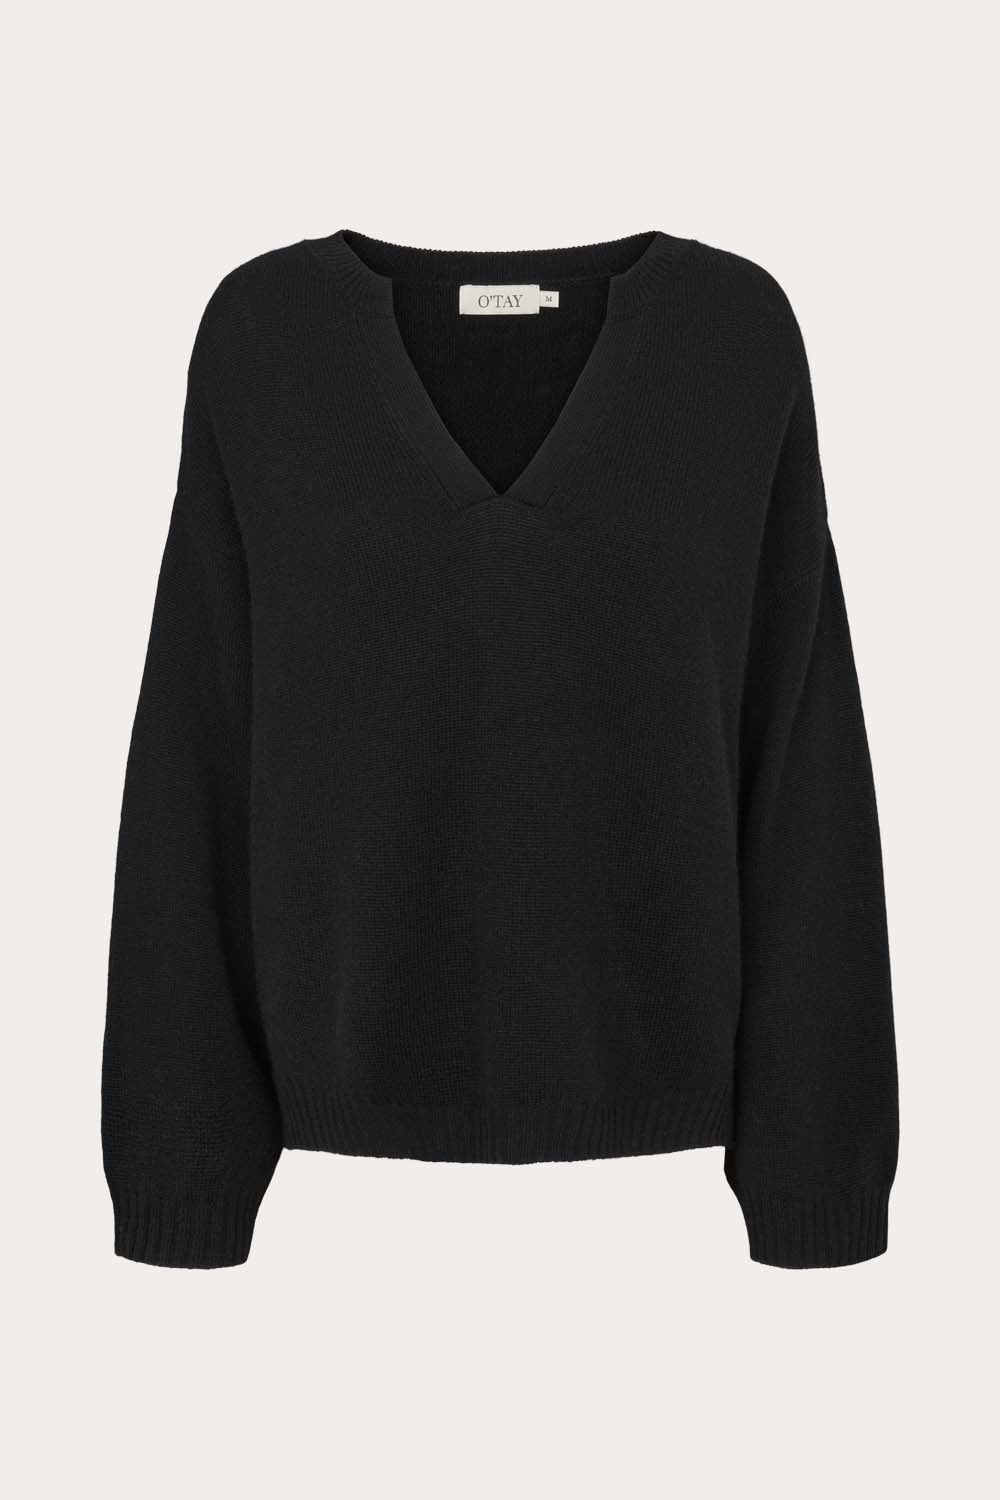 O'TAY Donna Sweater Blouses Black